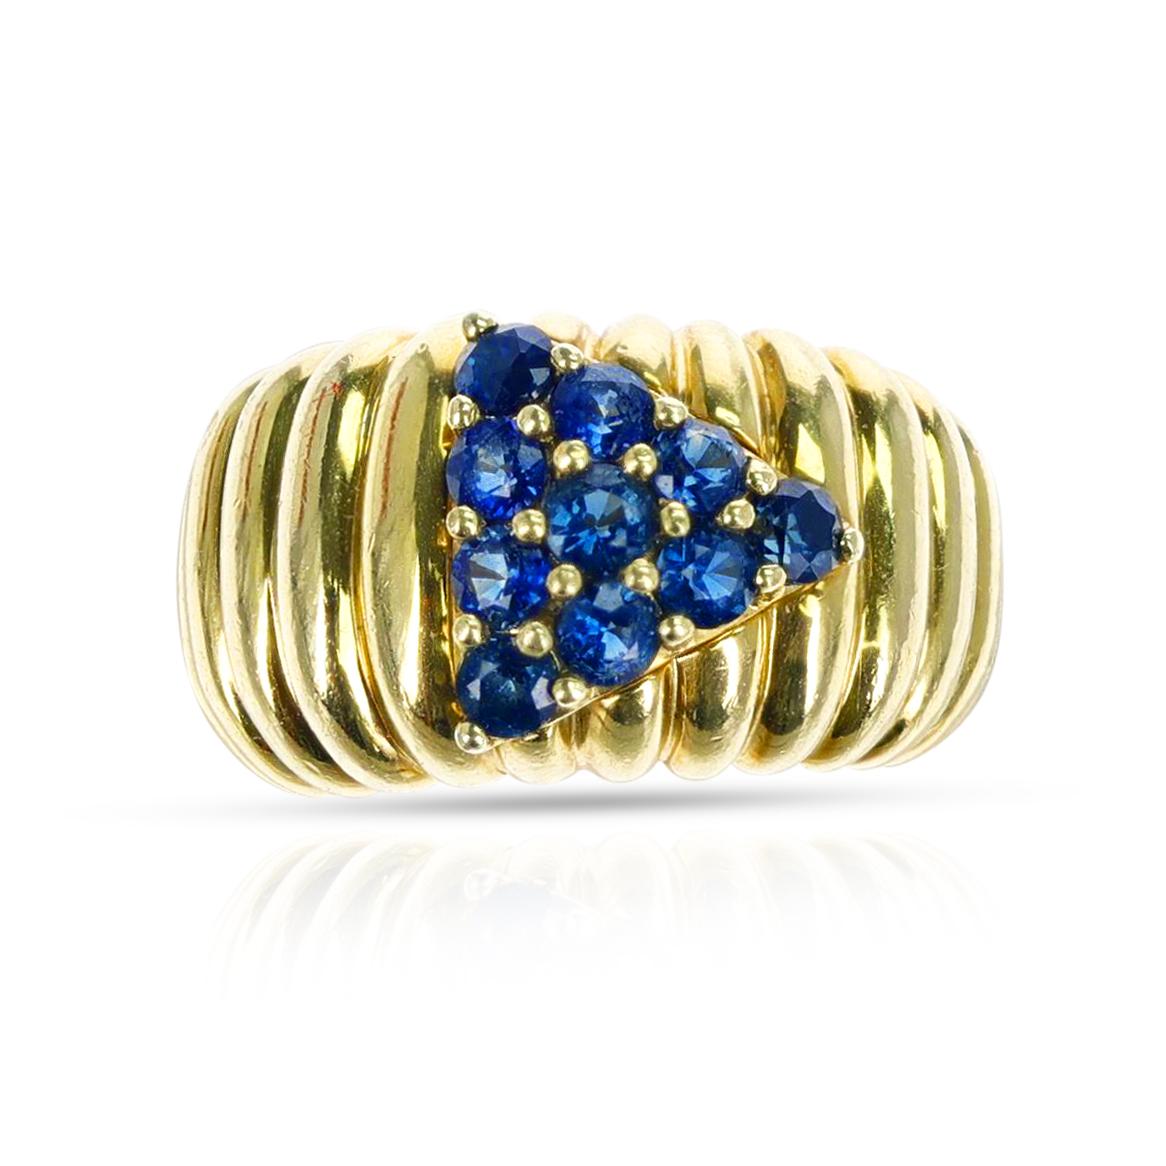 Jose Hess Sapphire and Gold Statement Ring, 18k In Excellent Condition For Sale In New York, NY